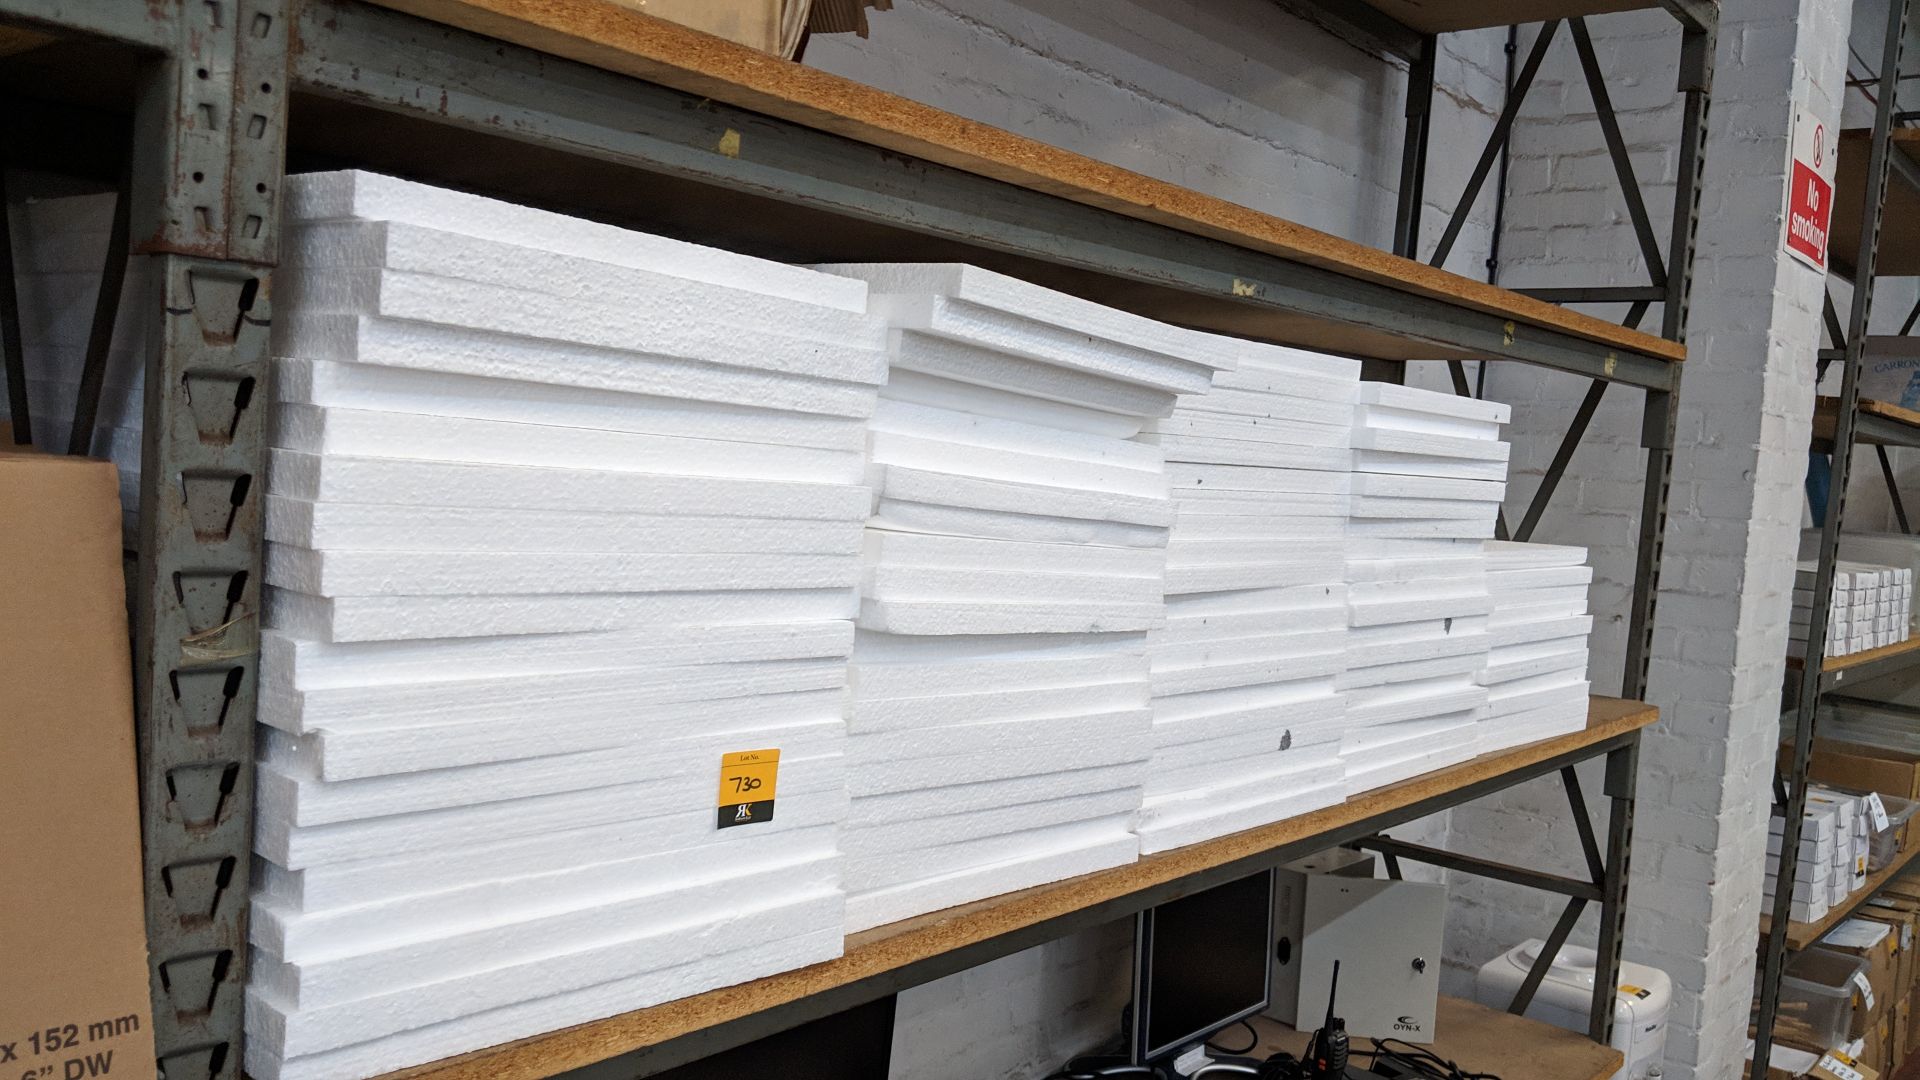 The contents of a bay of polystyrene sheets, in 5 stacks, each sheet measuring approximately 600mm x - Image 3 of 4